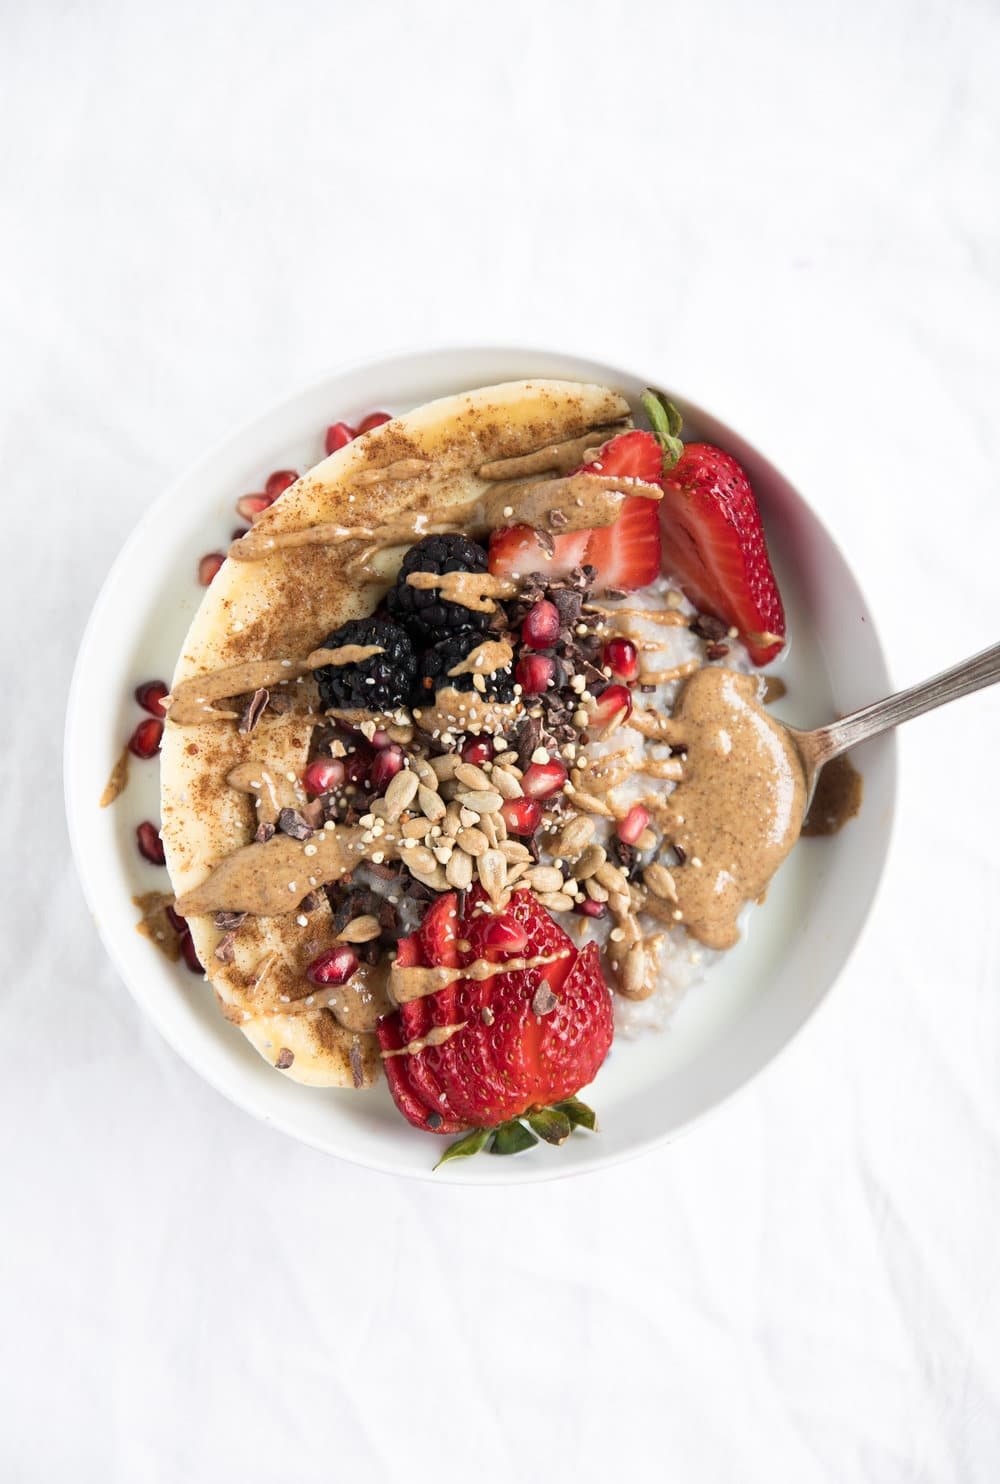 Buckwheat Oatmeal Breakfast Bowl covered in seeds strawberries and peanut butter